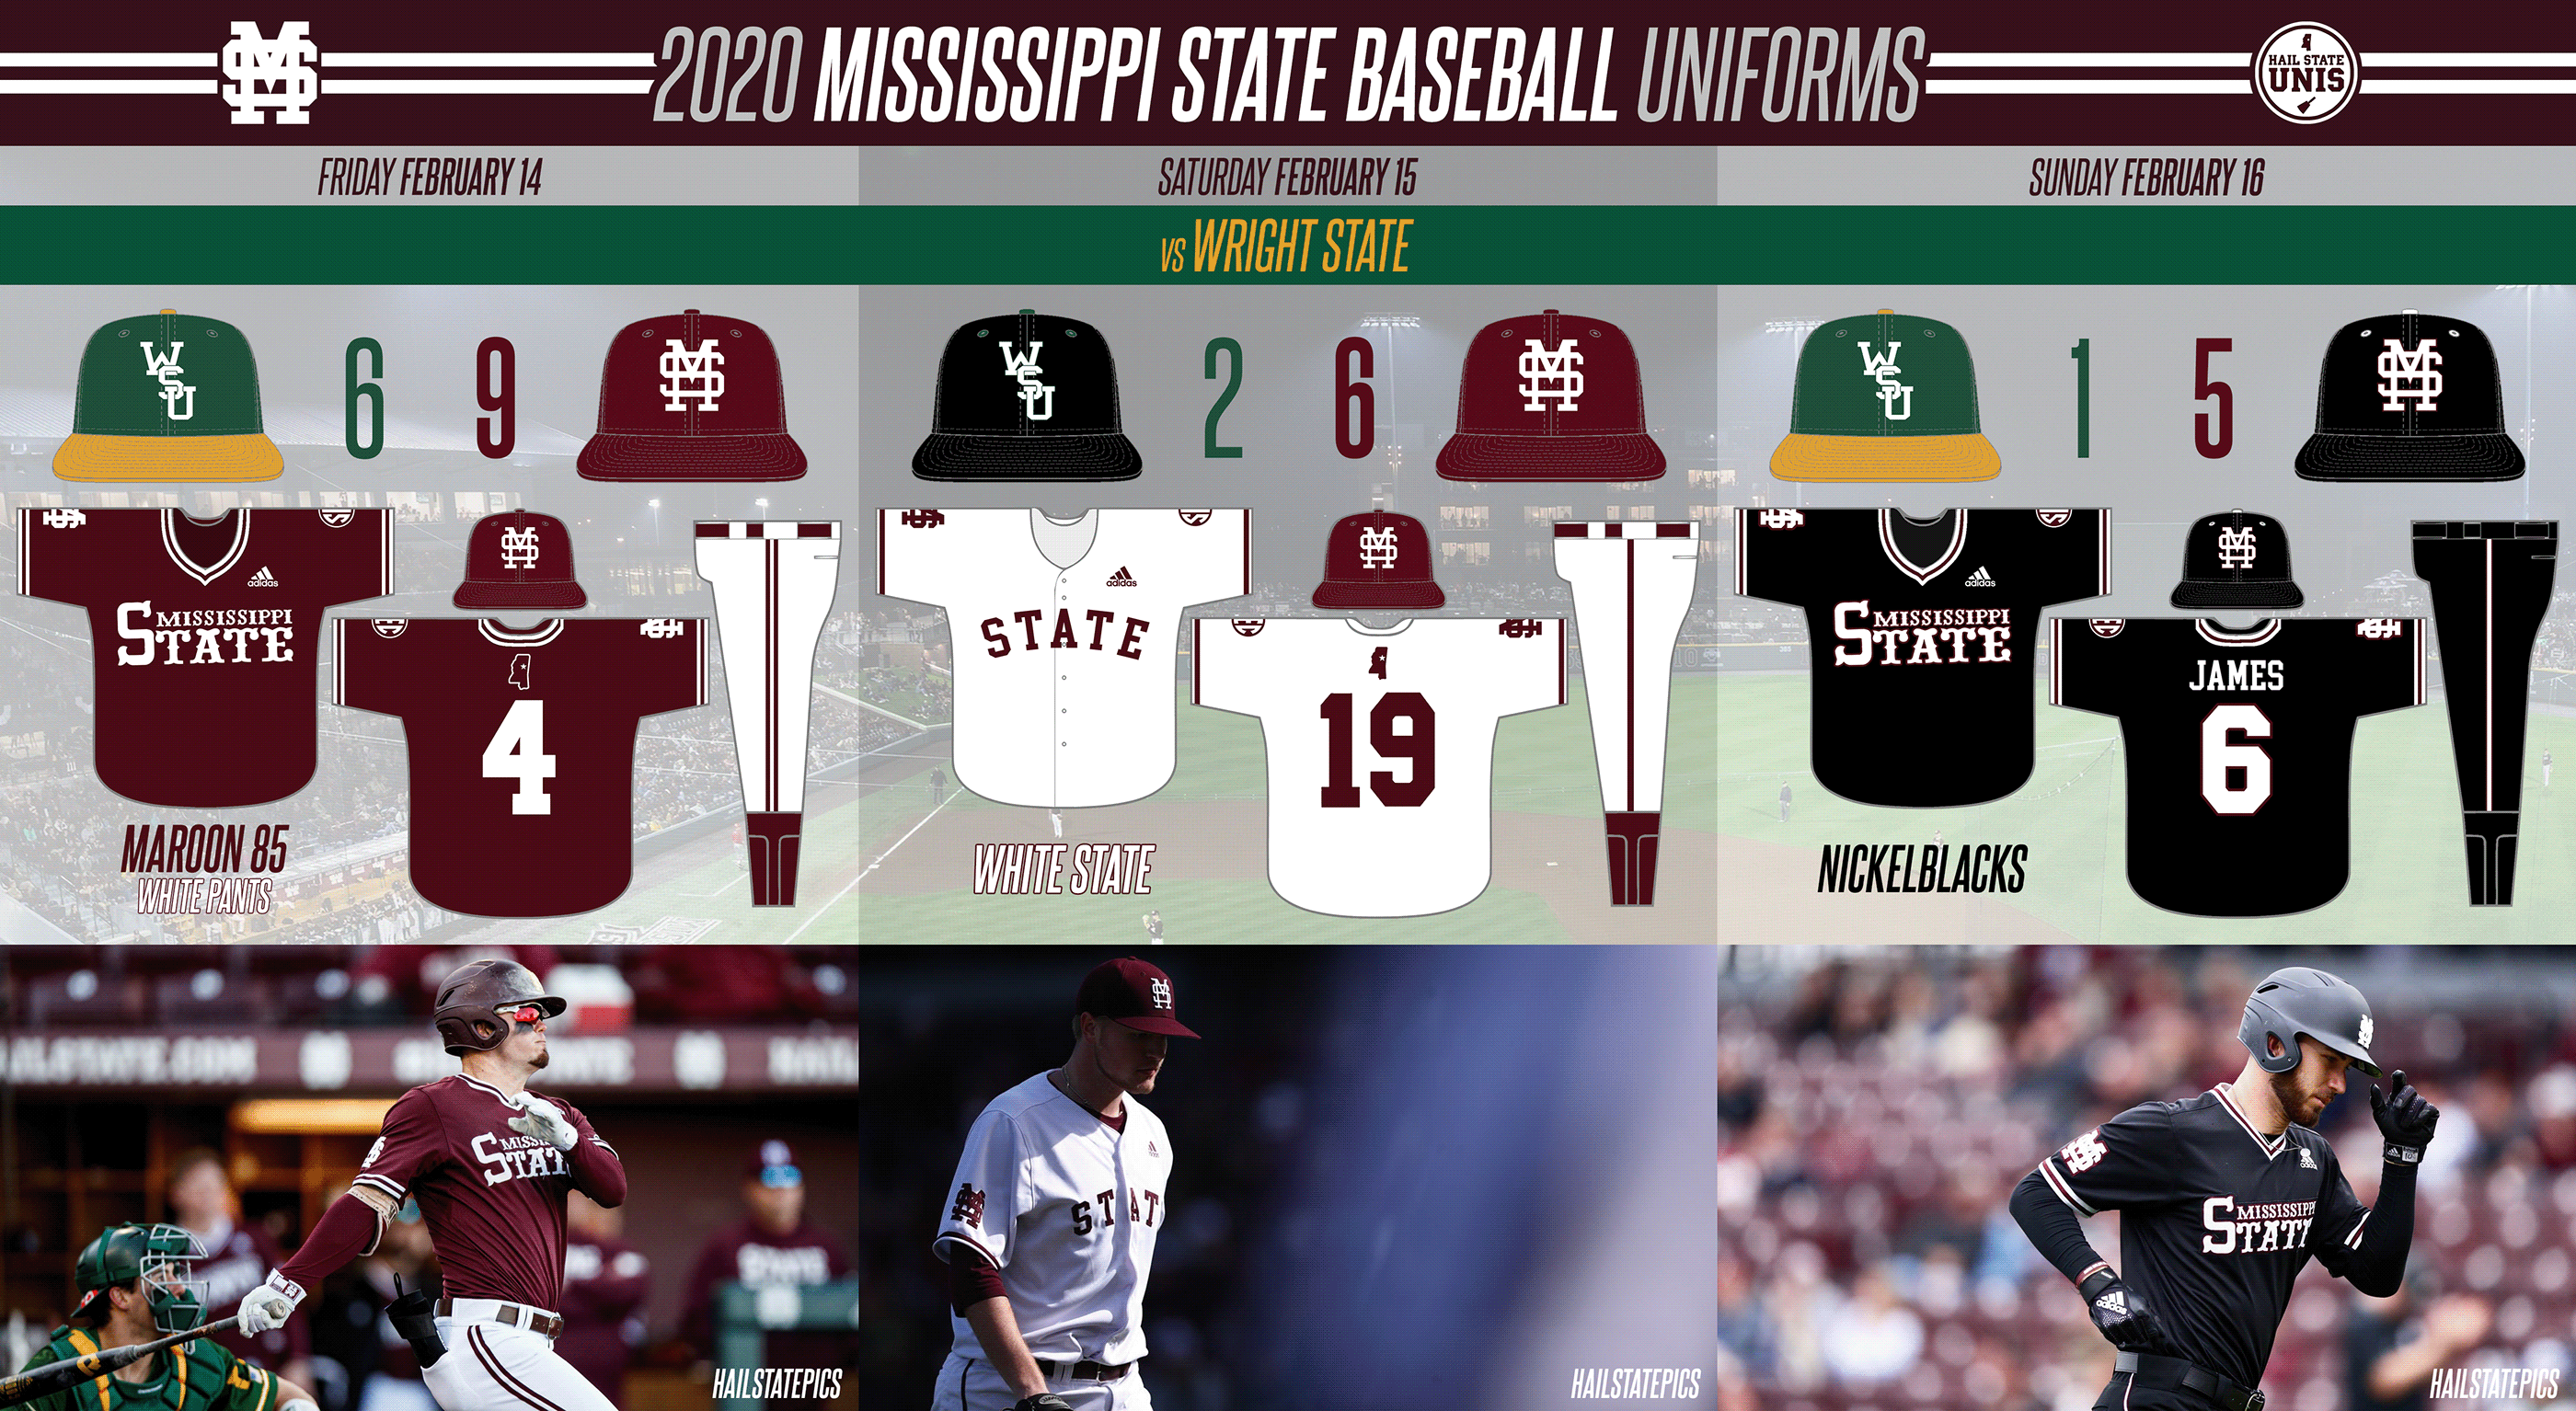 Bulldogs Open 2020 Season With Sweep of Wright State - Hail State Unis